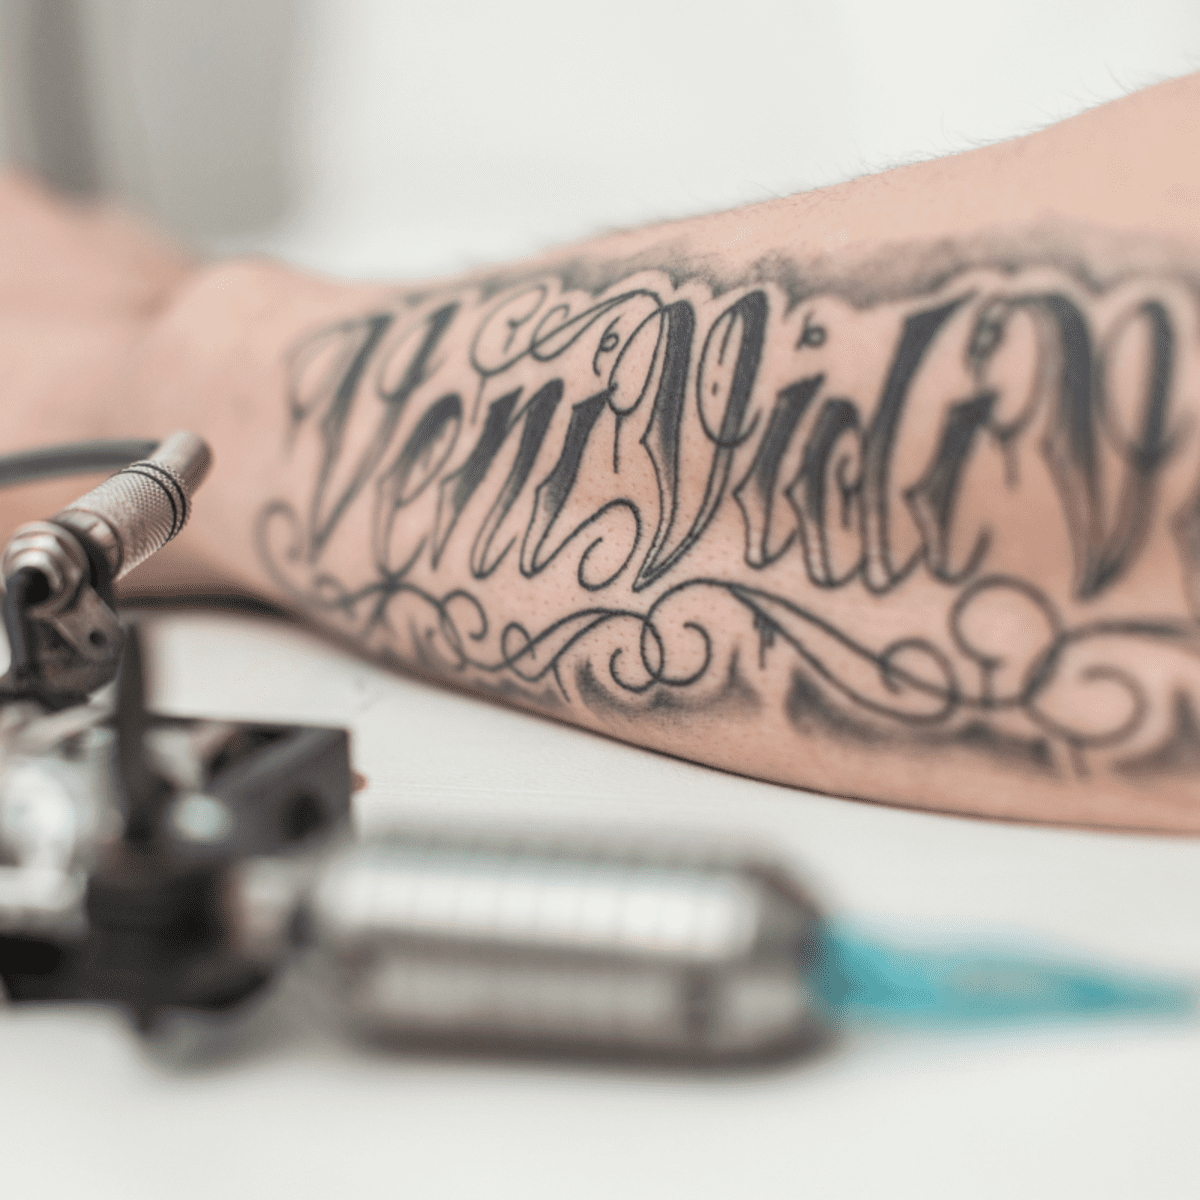 Tattoo Prices How Much Does a Tattoo Cost  United Kingdom Rates 2020